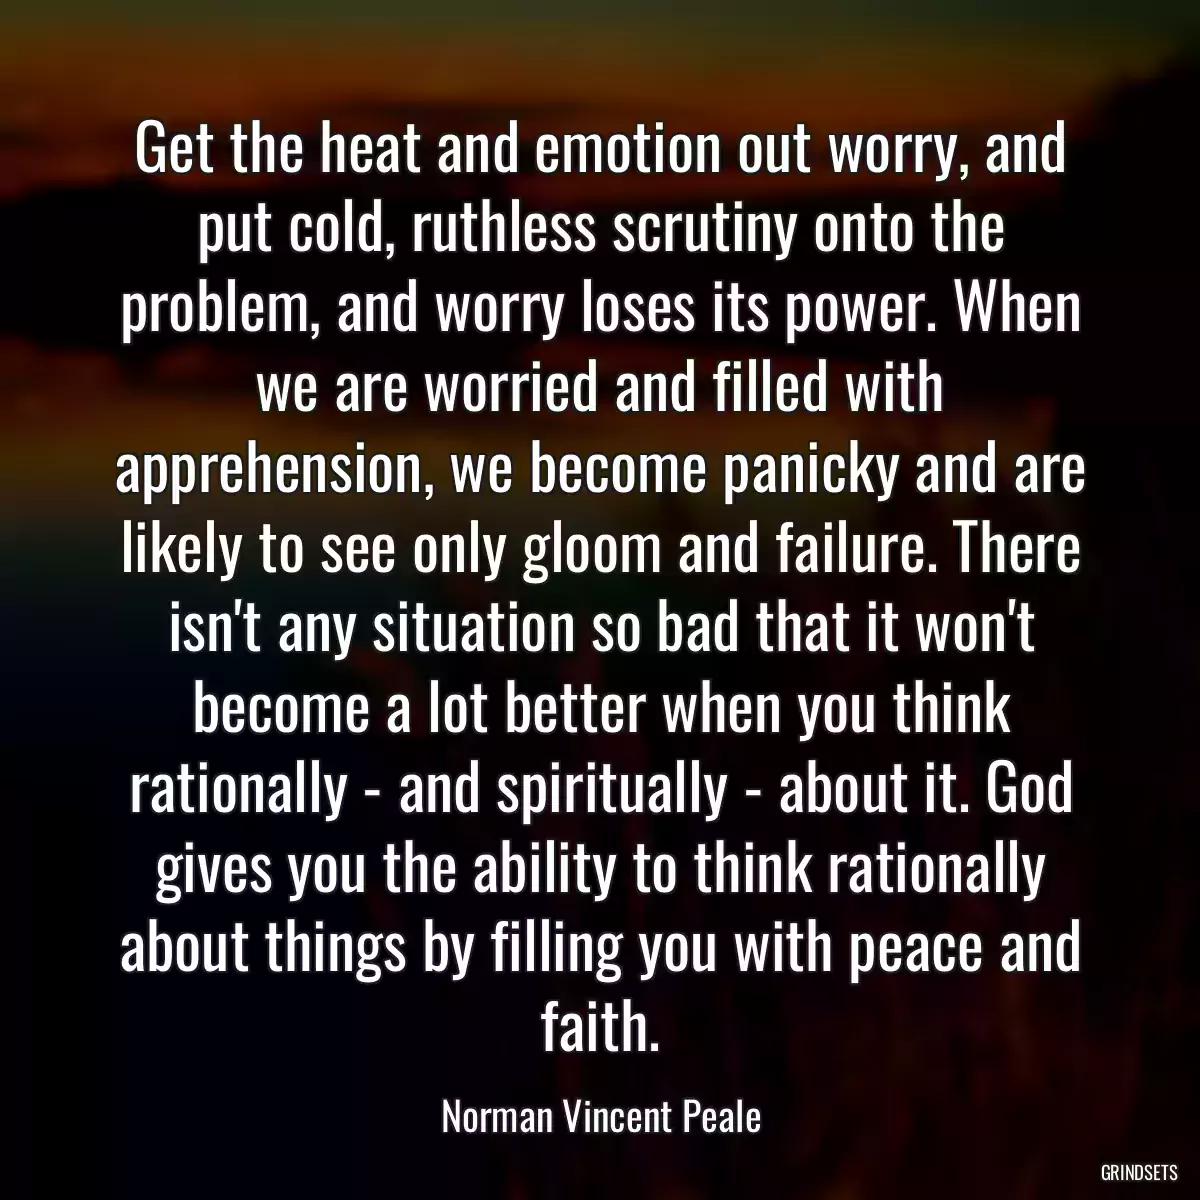 Get the heat and emotion out worry, and put cold, ruthless scrutiny onto the problem, and worry loses its power. When we are worried and filled with apprehension, we become panicky and are likely to see only gloom and failure. There isn\'t any situation so bad that it won\'t become a lot better when you think rationally - and spiritually - about it. God gives you the ability to think rationally about things by filling you with peace and faith.